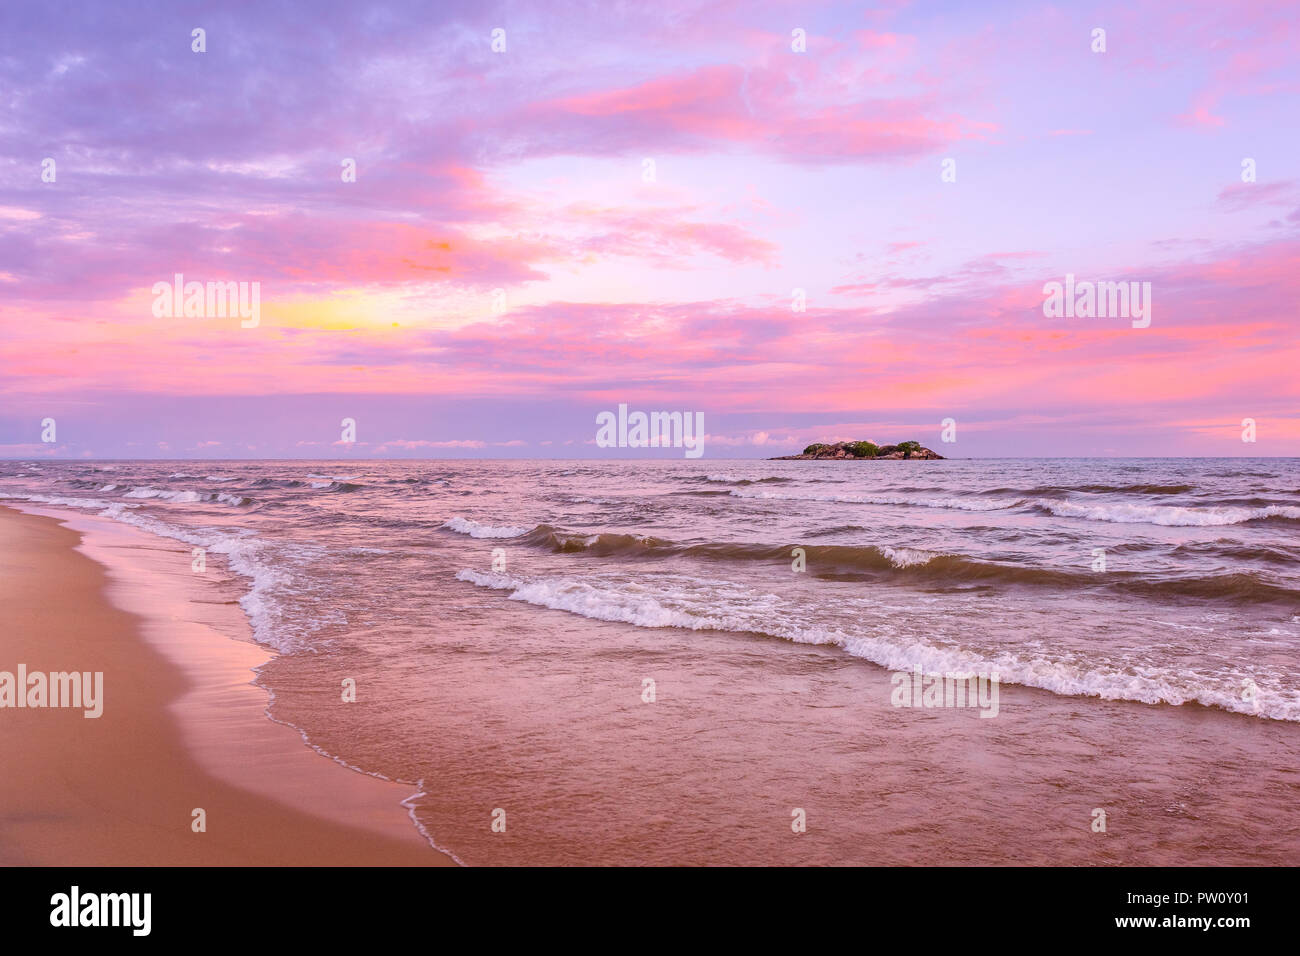 Pink sunset on lake beach sea sand beautiful colors in the sky clouds with island in the distance, Lake Malawi, Malawi, Africa Stock Photo